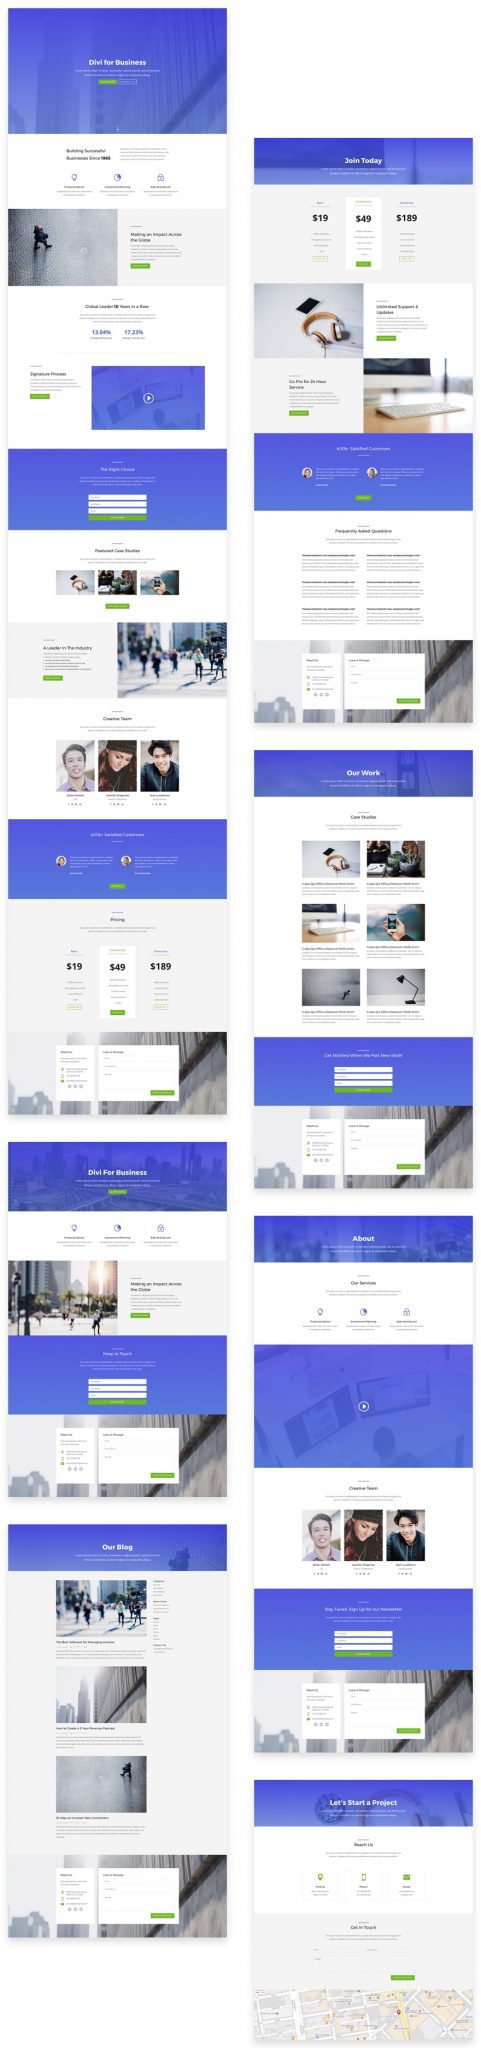 Business layout pack